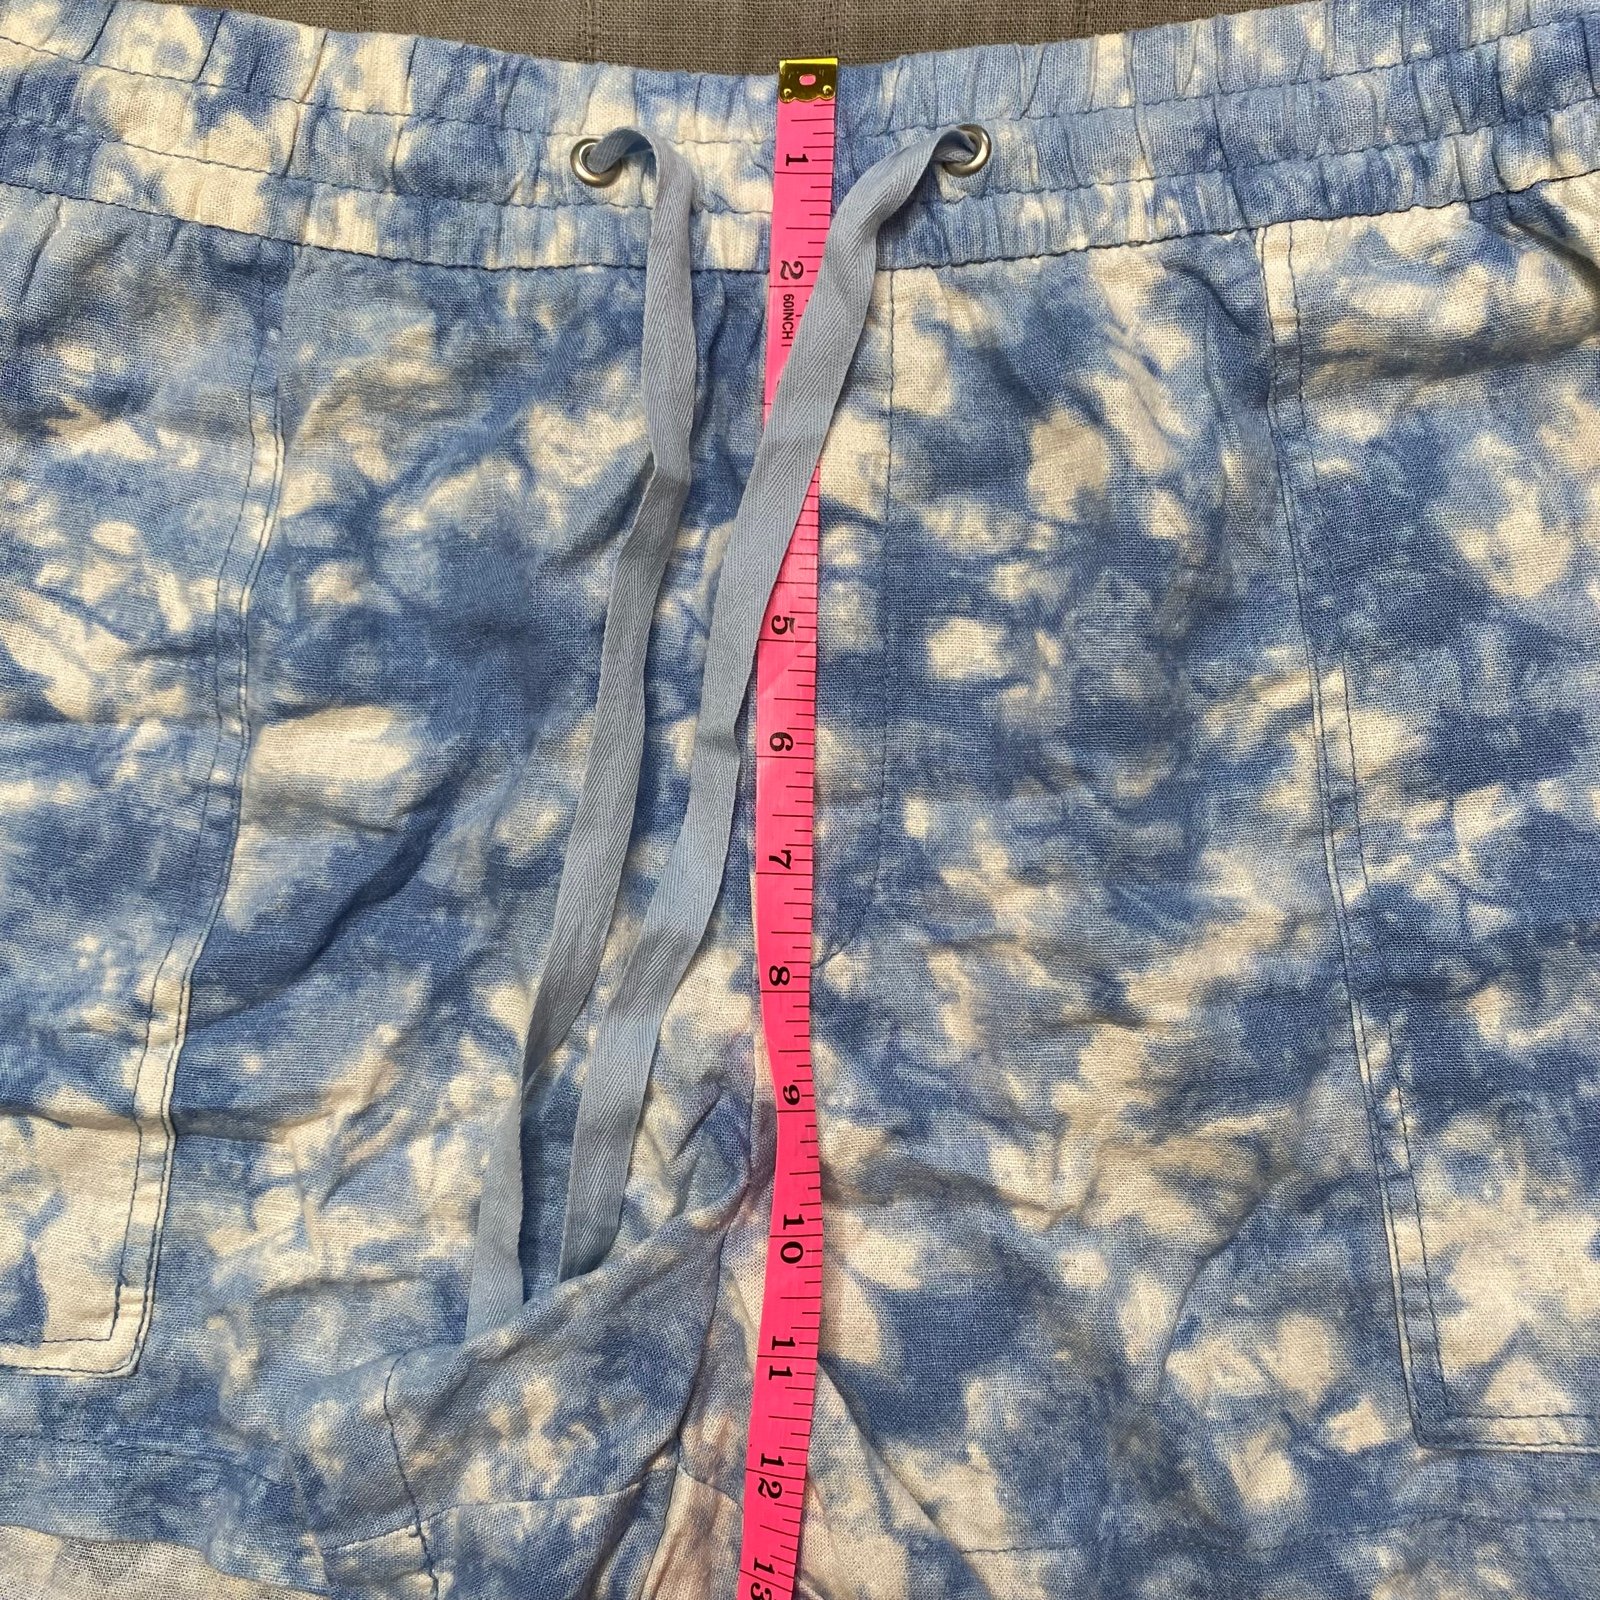 The Best Seller Tie dye blue and white pull on shorts pOb15oeAC best sale